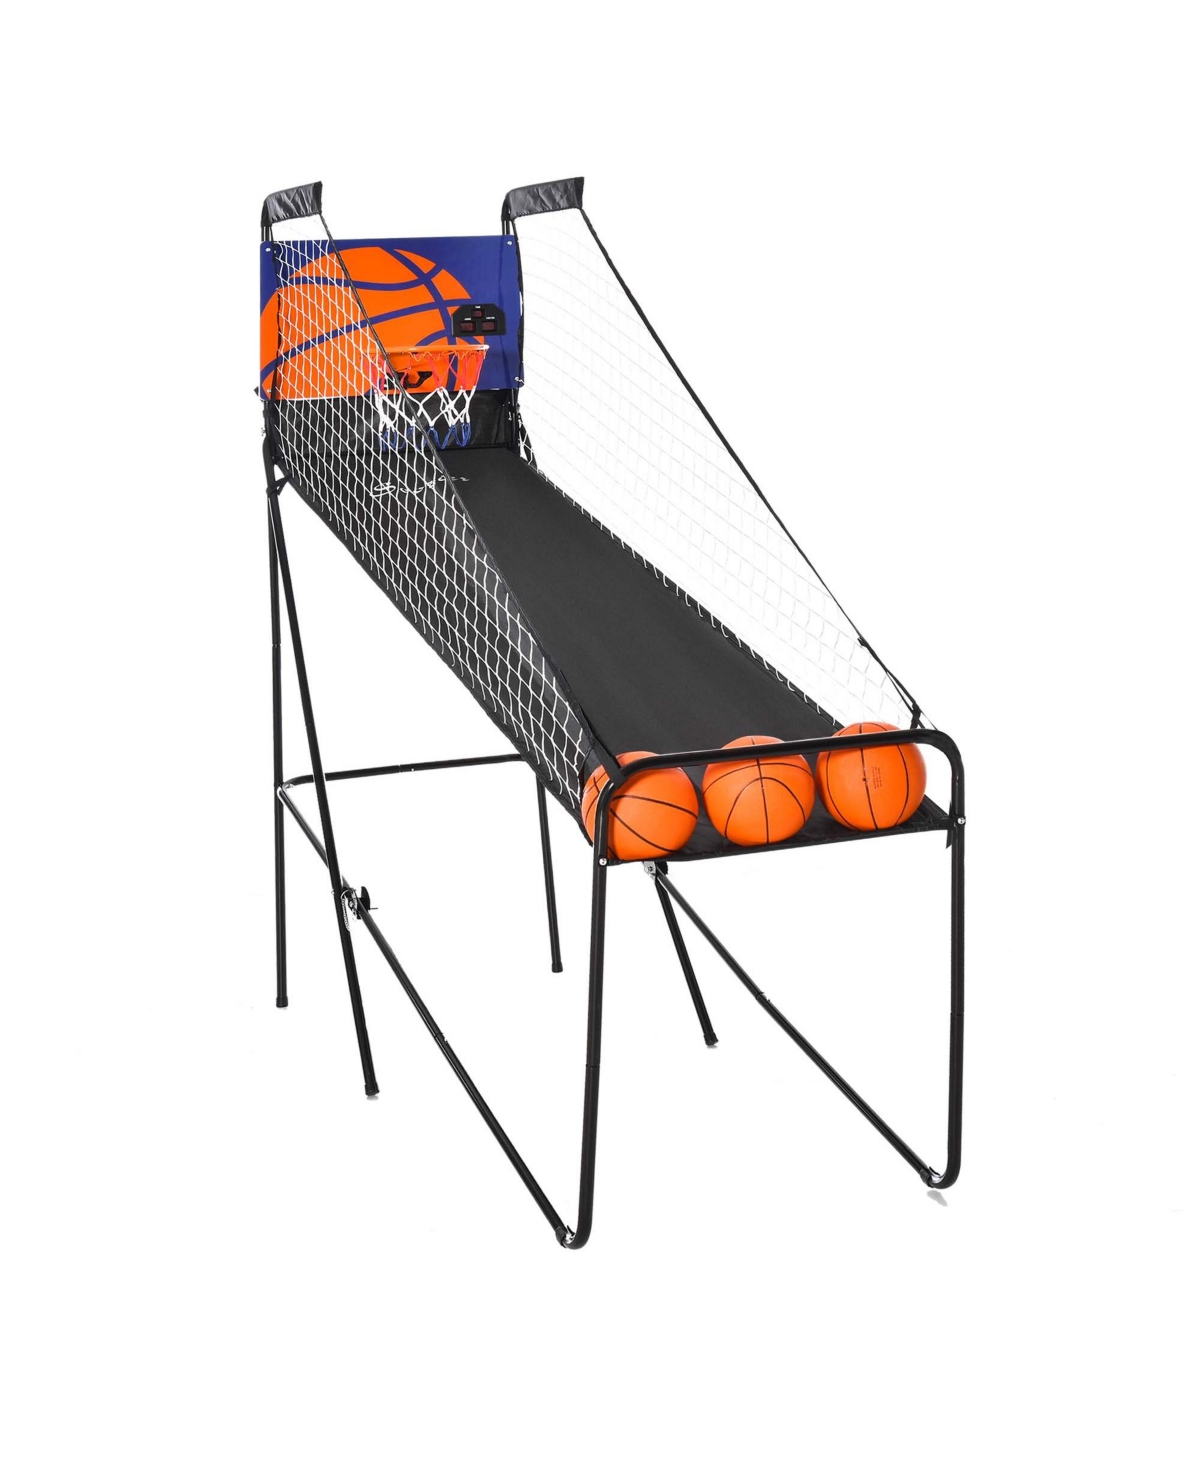 Basketball Hoop Arcade Game with Electronic Score Board for 1 to 2 Players - Black